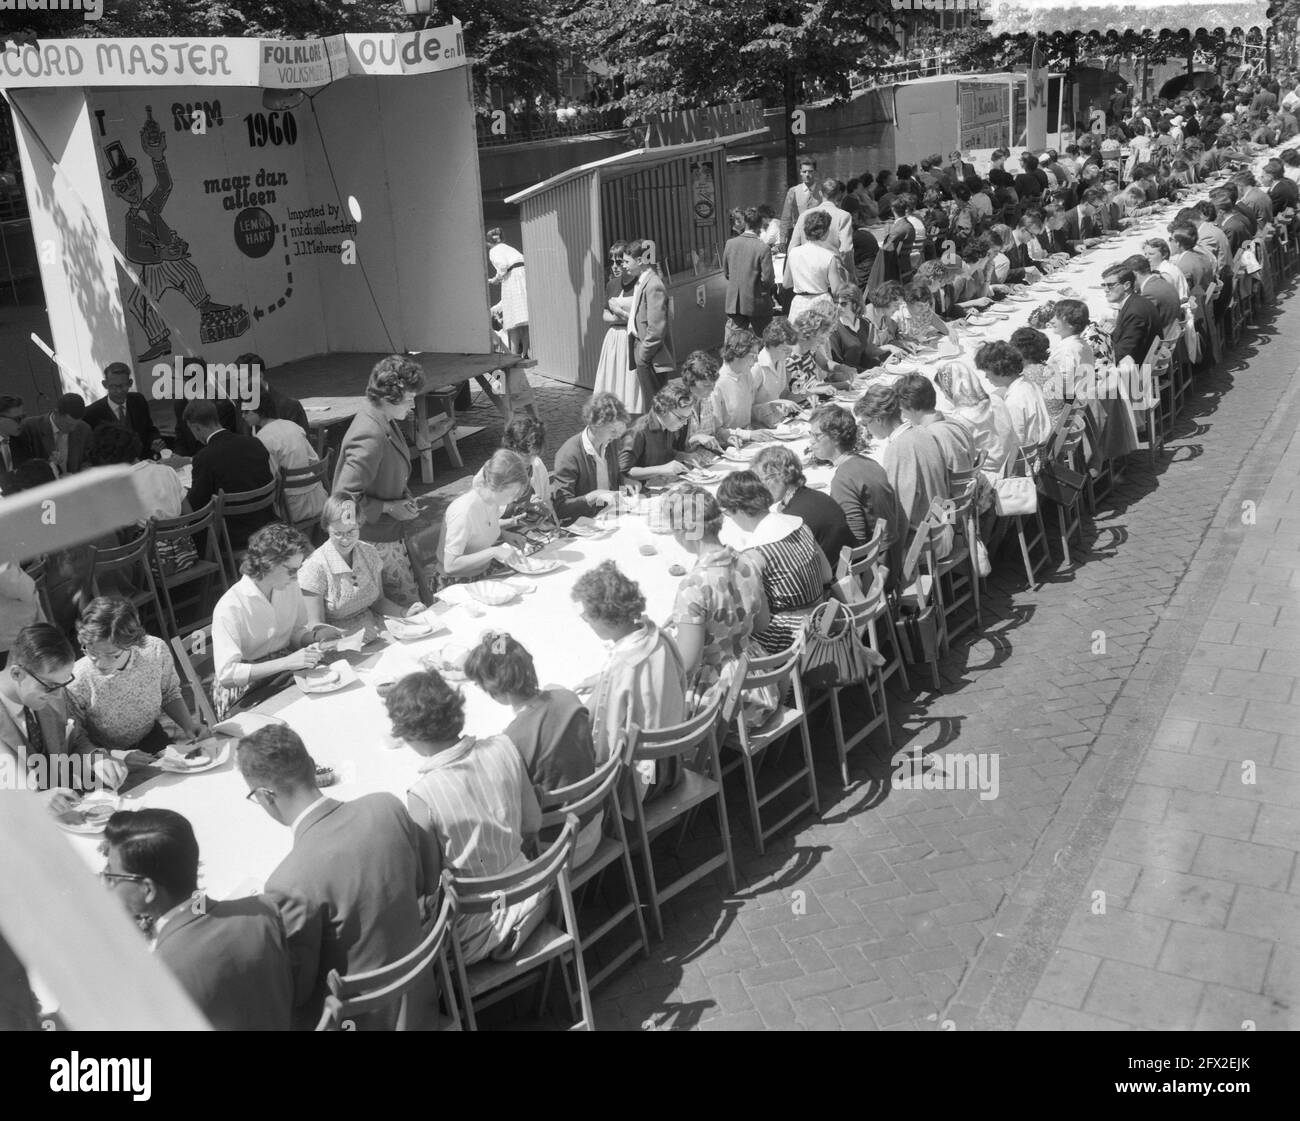 Lunch of 2000 students with Princess Beatrix Leiden, June 15, 1960, STUDENTS, lunch, The Netherlands, 20th century press agency photo, news to remember, documentary, historic photography 1945-1990, visual stories, human history of the Twentieth Century, capturing moments in time Stock Photo